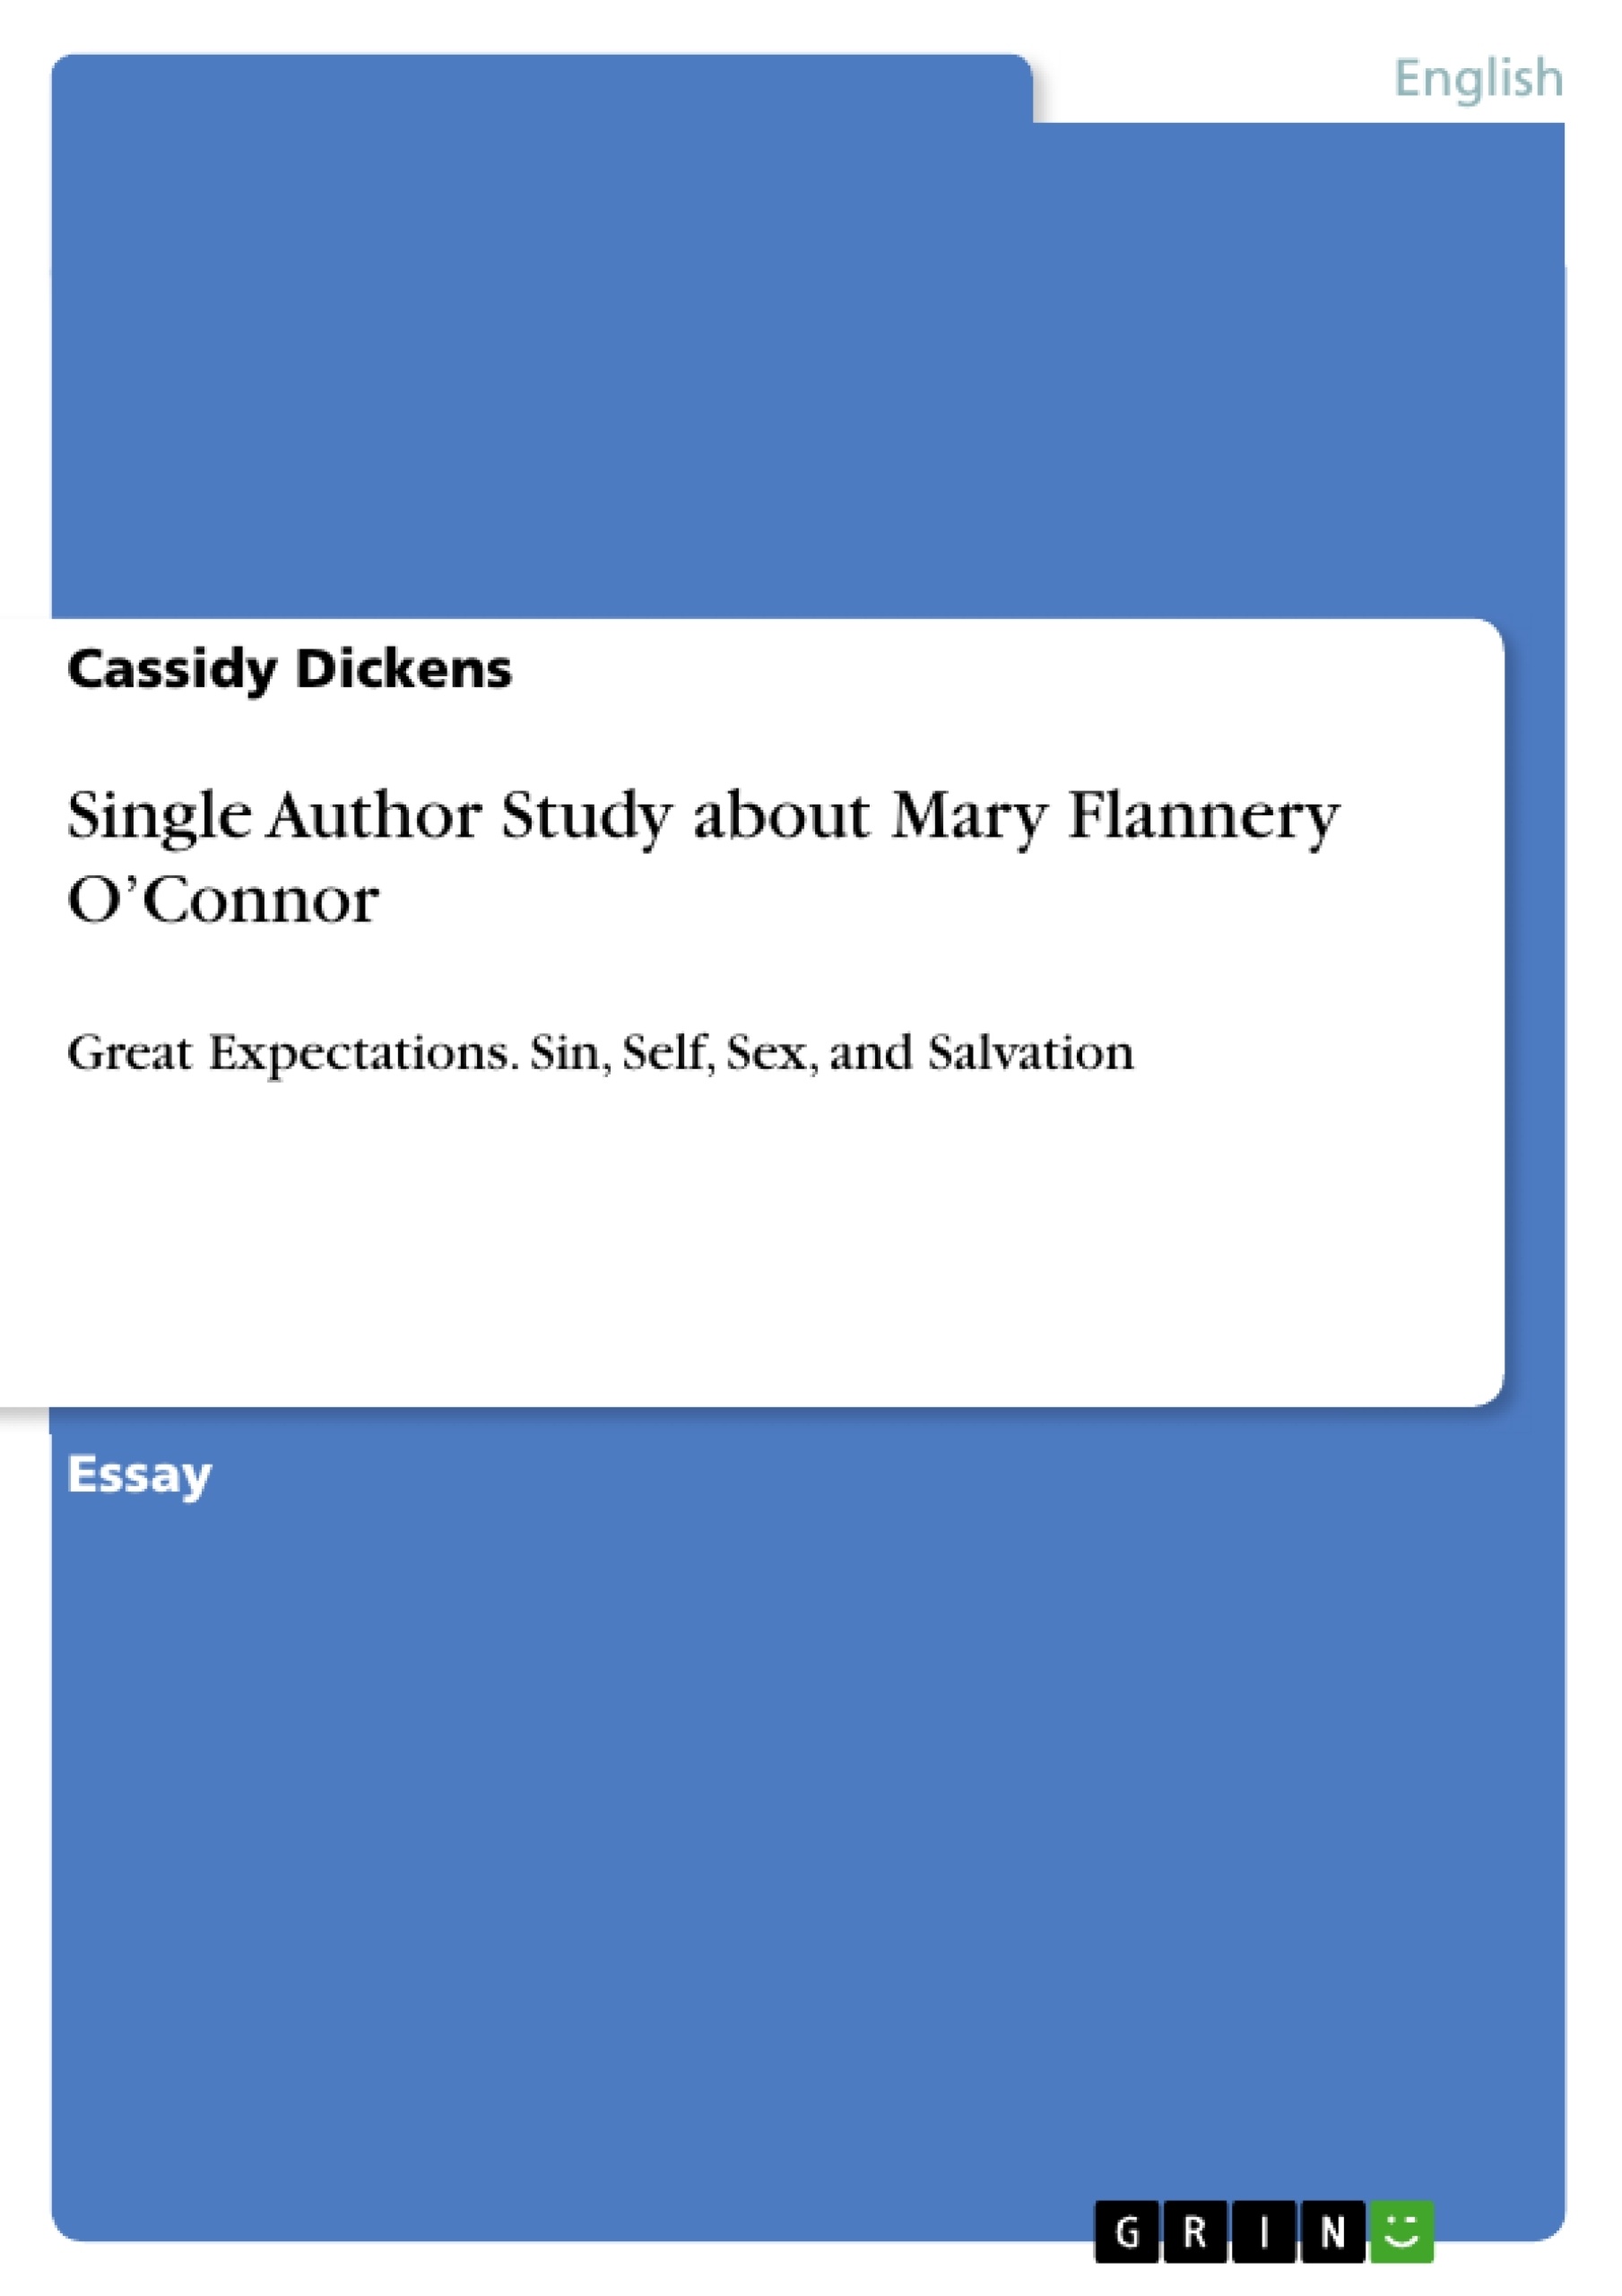 Título: Single Author Study about Mary Flannery O’Connor